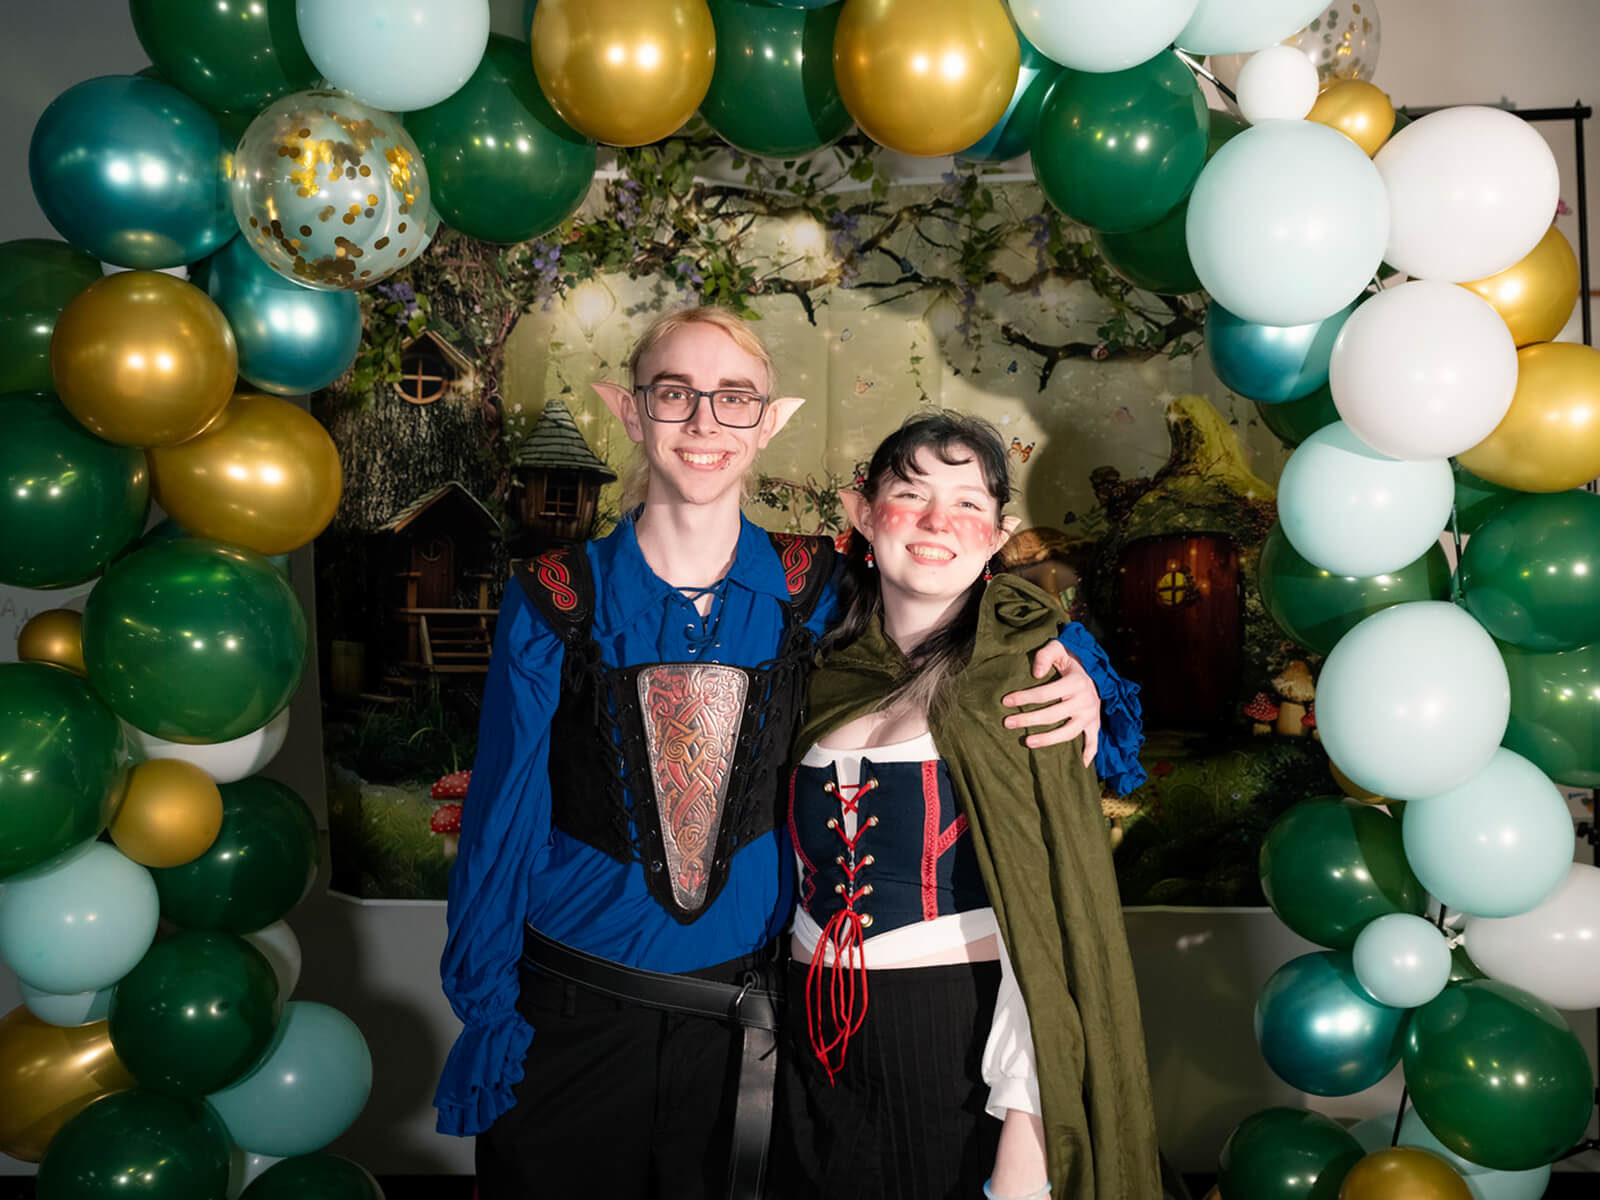 Two DigiPen students dressed as elves pose in front of a balloon arch at the first annual DigiProm.